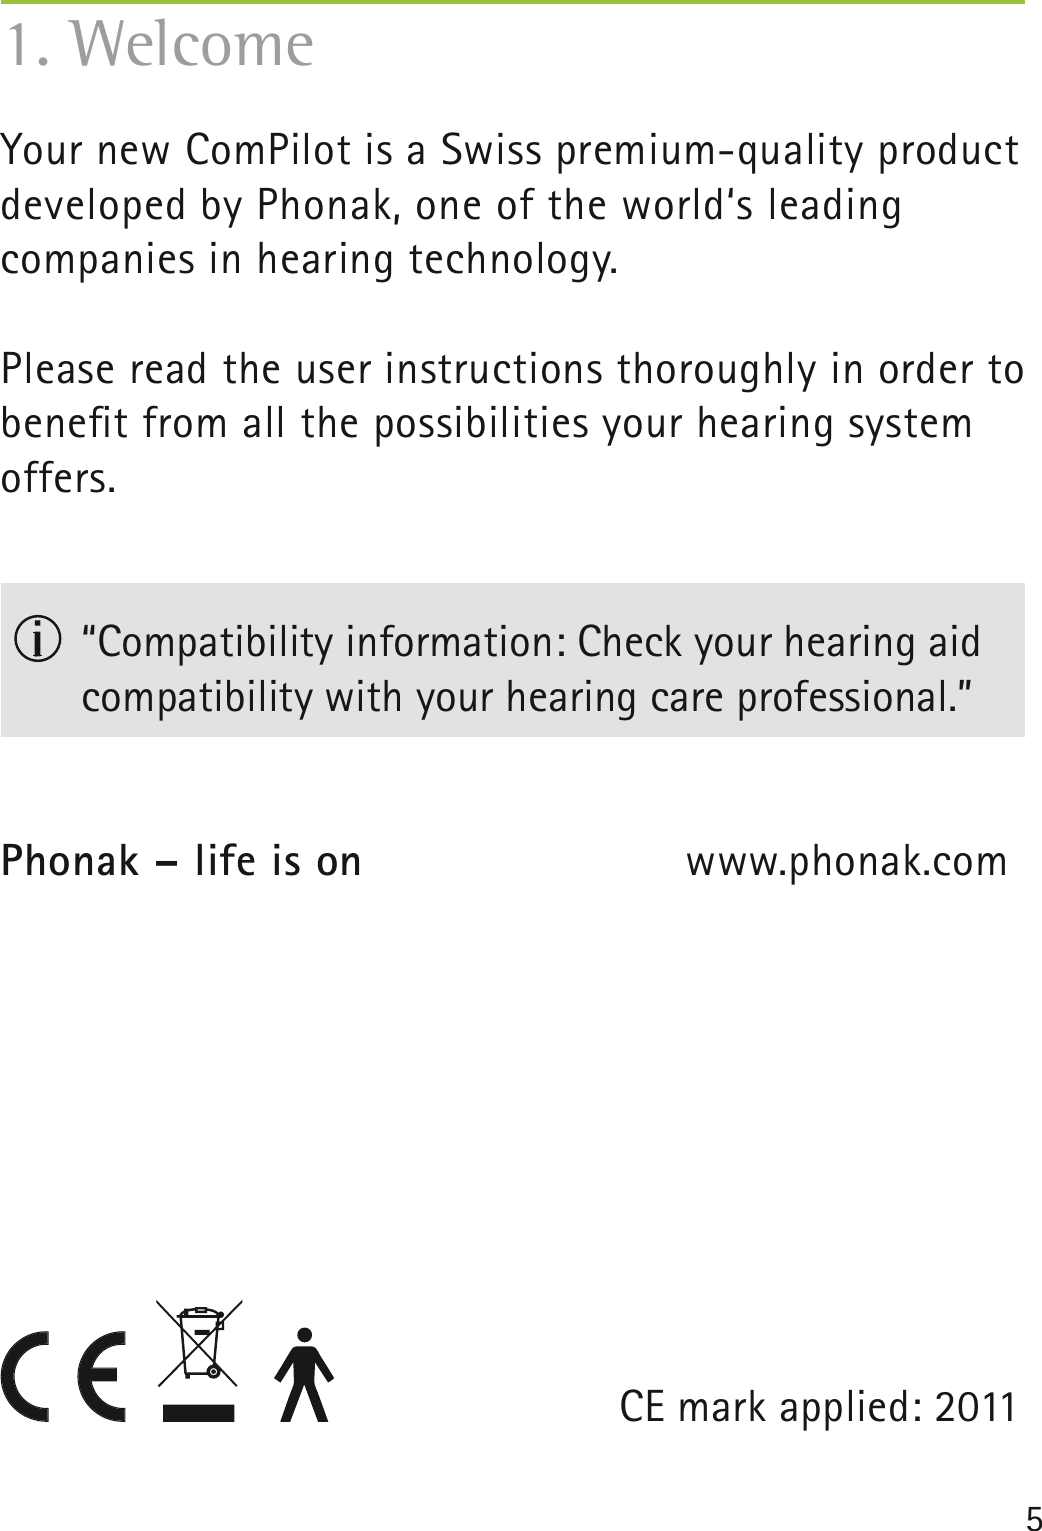 51. WelcomeYour new ComPilot is a Swiss premium-quality product developed by Phonak, one of the world‘s leading companies in hearing technology.Please read the user instructions thoroughly in order to beneﬁ t from all the possibilities your hearing system offers.  “Compatibility information: Check your hearing aid compatibility with your hearing care professional.” Phonak – life is on    www.phonak.comCE mark applied: 2011